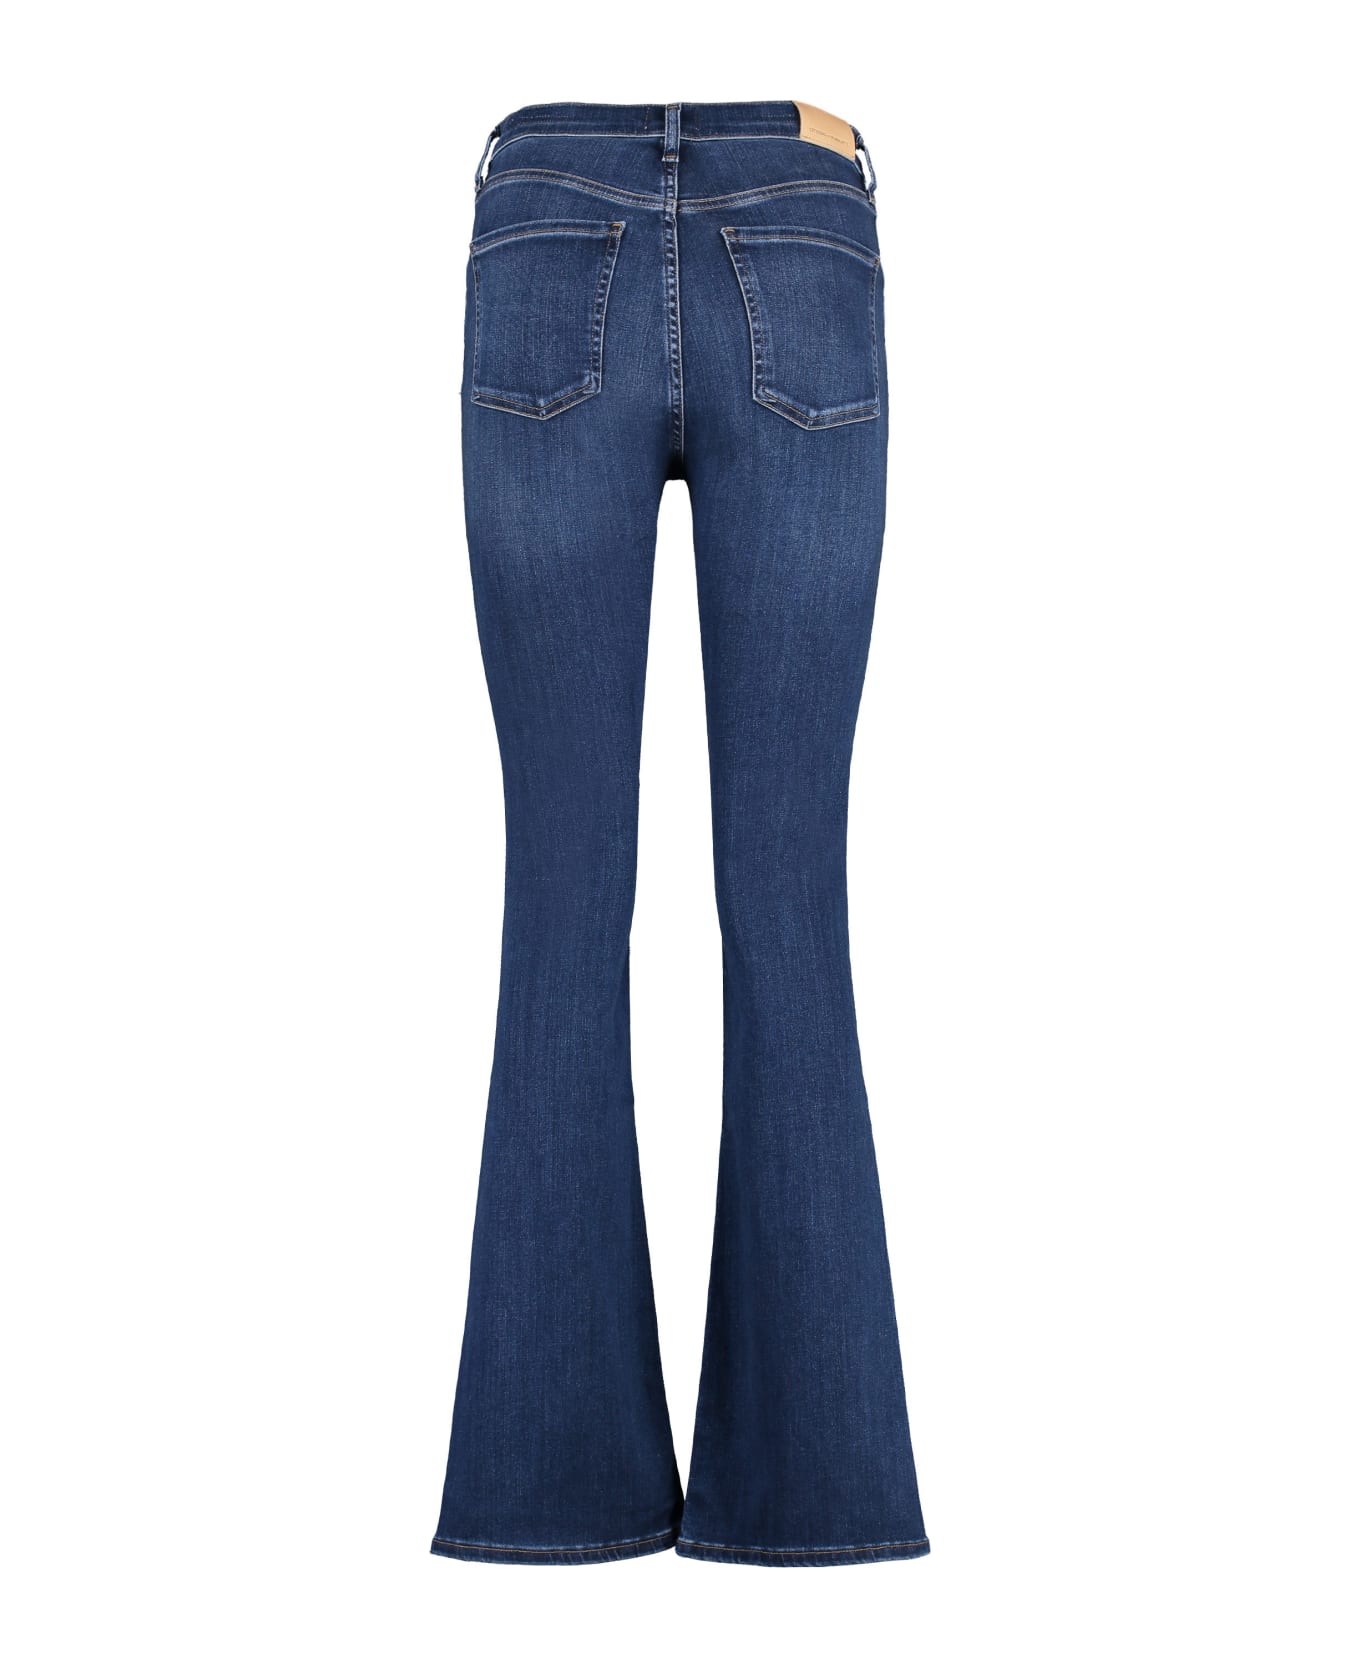 Citizens of Humanity Lilah Bootcut Jeans - Denim